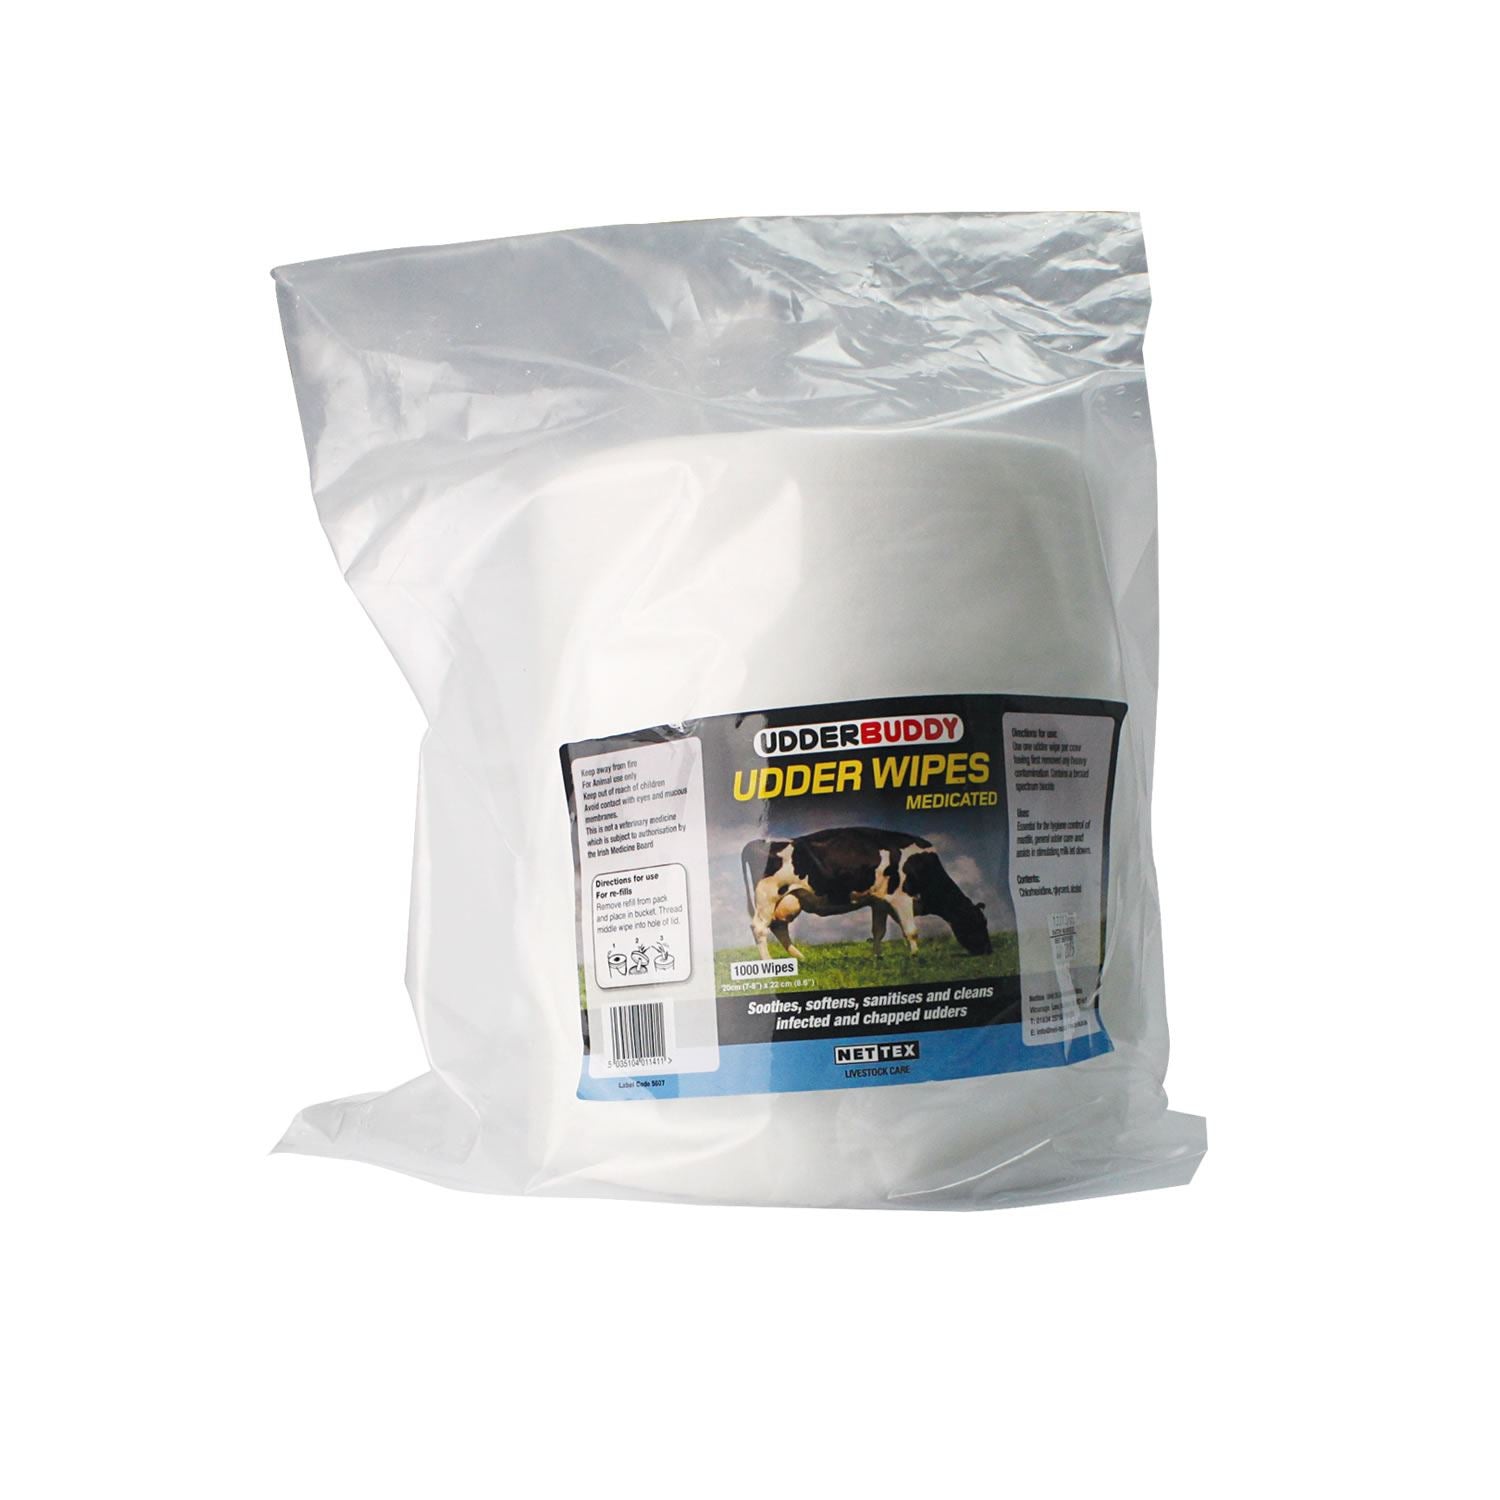 Nettex Medicated Conditioning Dairy Udder Wipes - Just Horse Riders